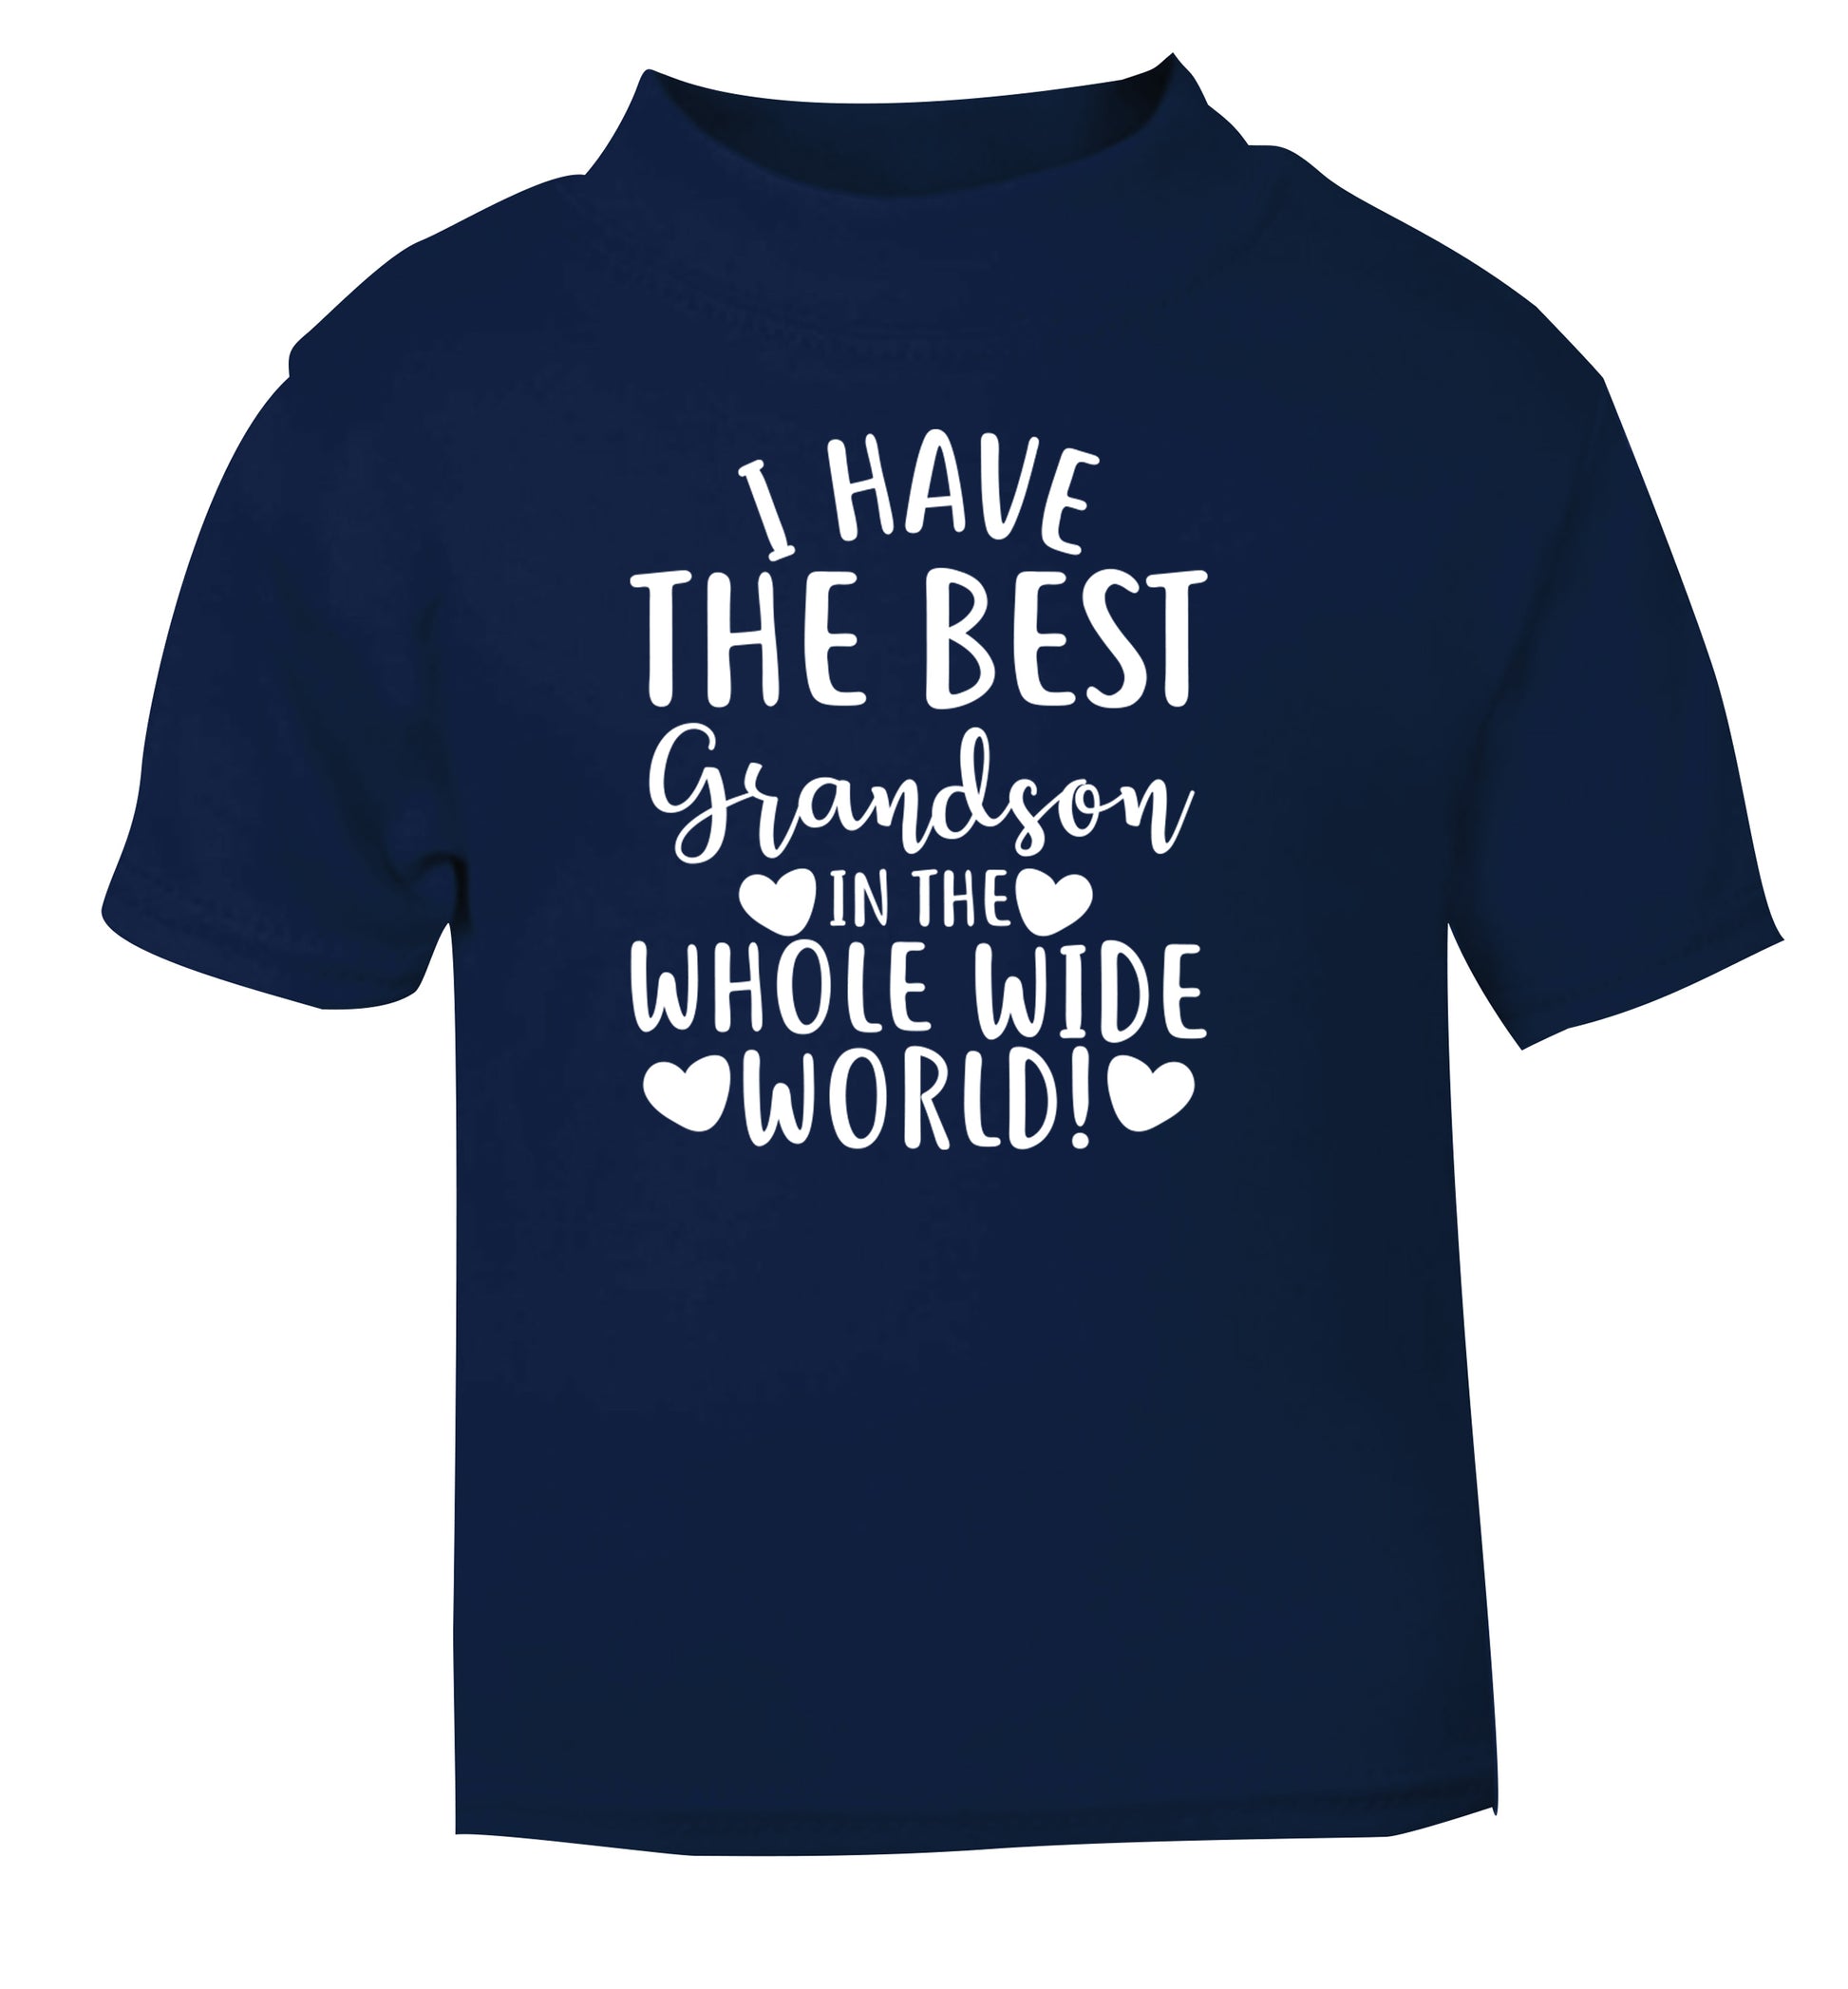 I have the best grandson in the whole wide world! navy Baby Toddler Tshirt 2 Years